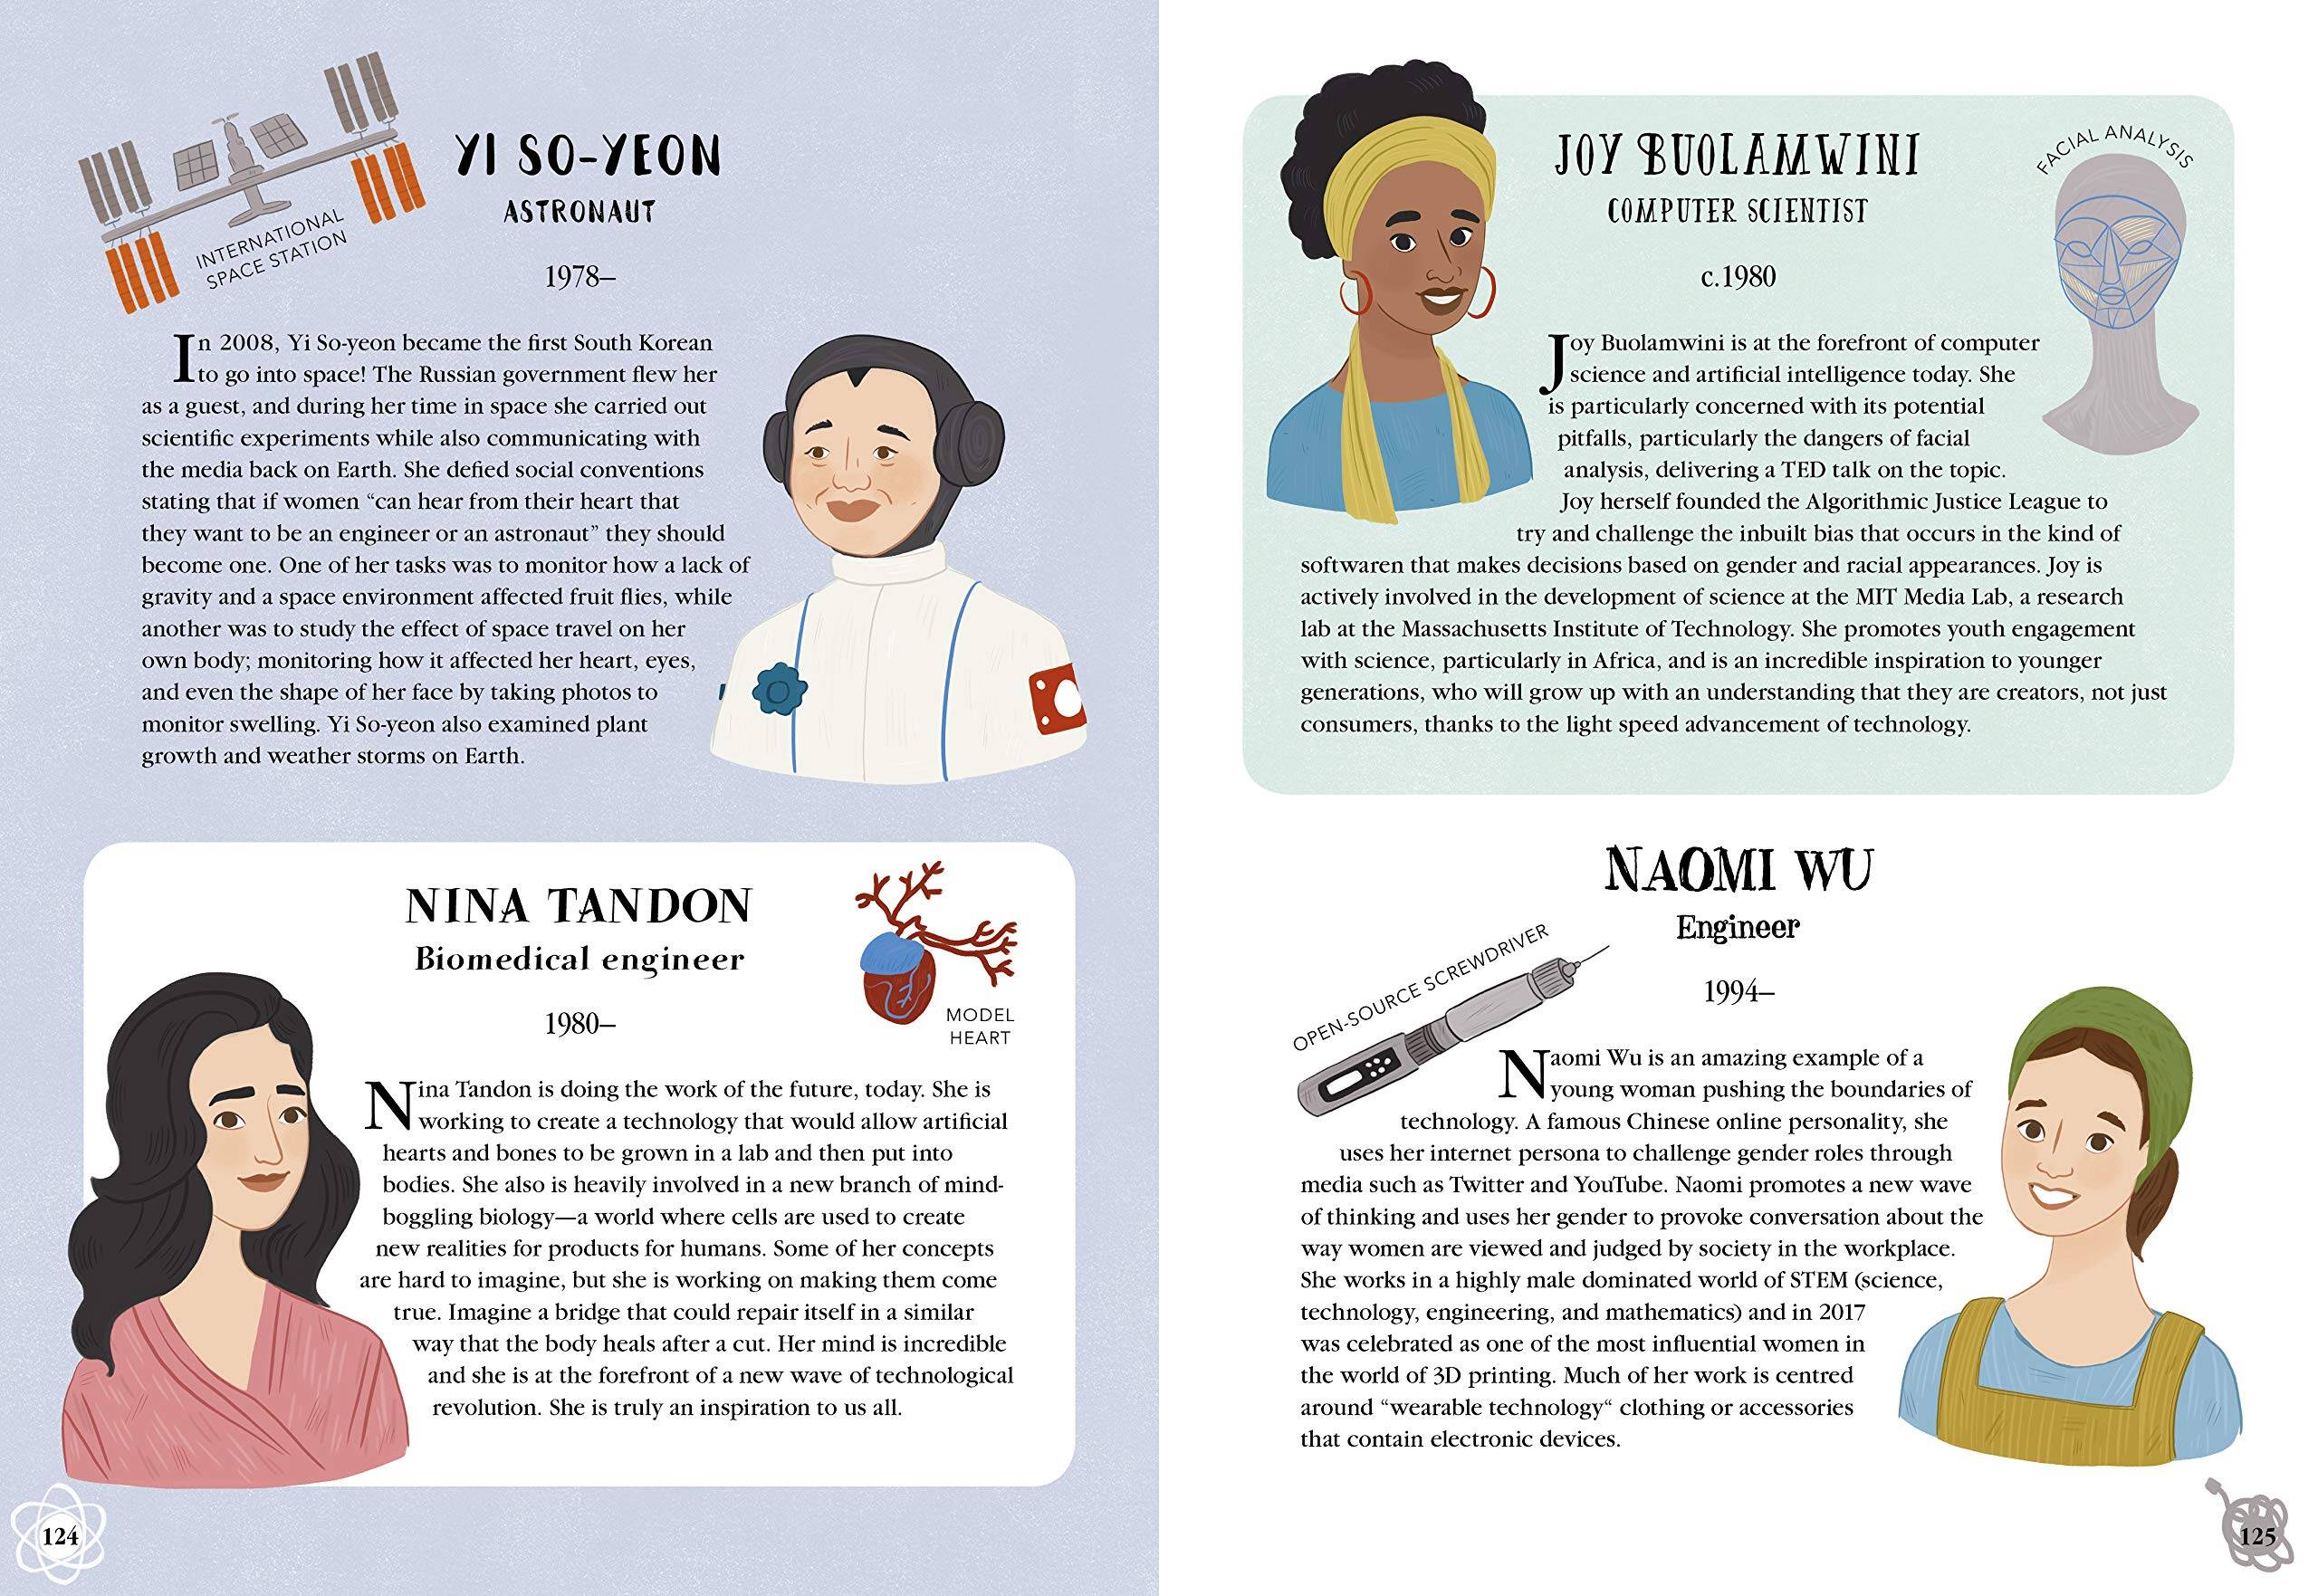 101 Awesome Women Who Transformed Science spread 4